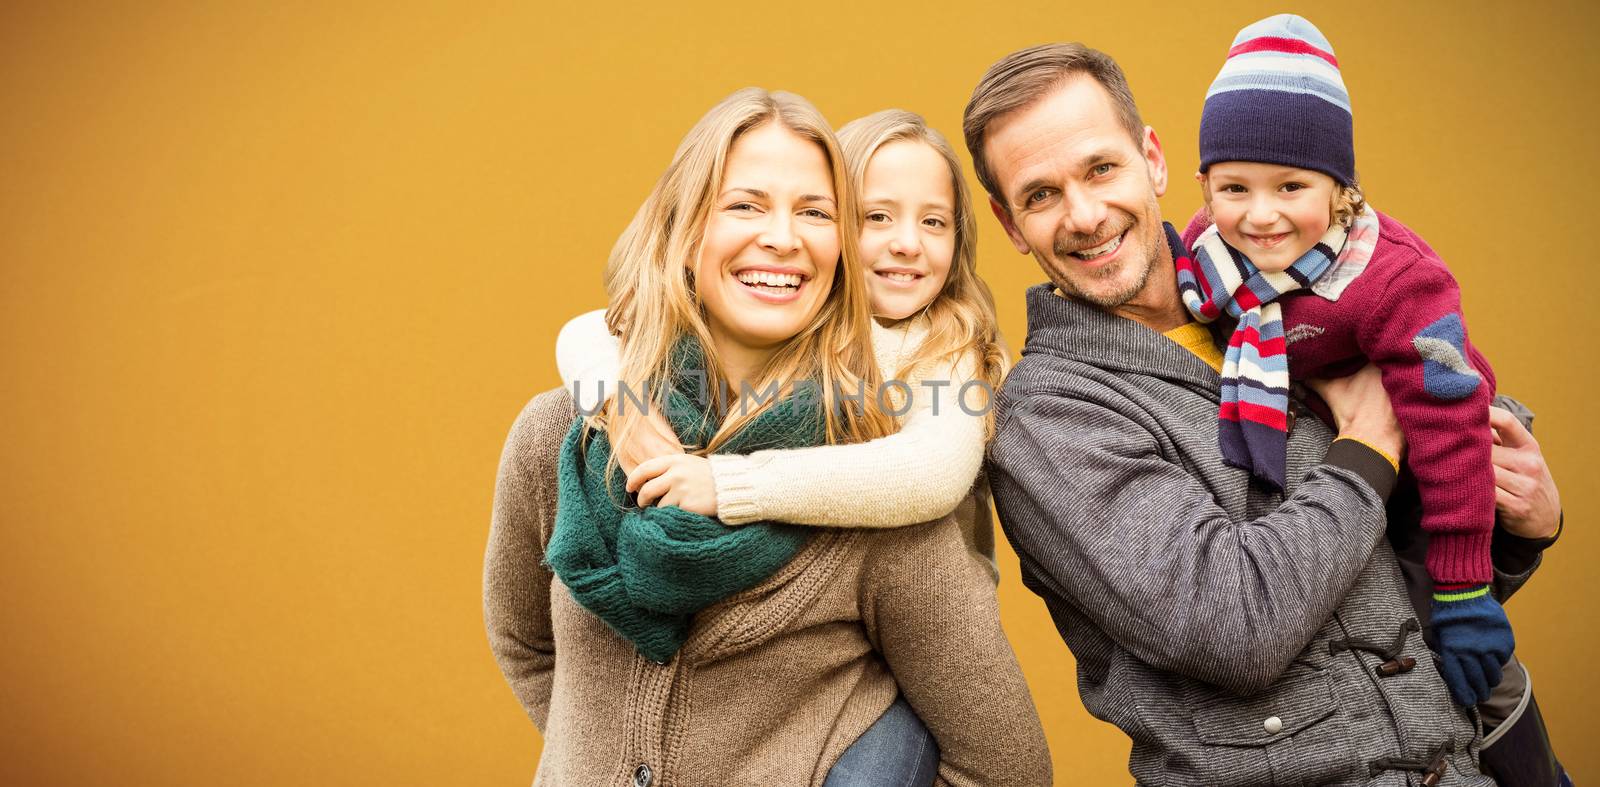 Composite image of portrait of family smiling together by Wavebreakmedia